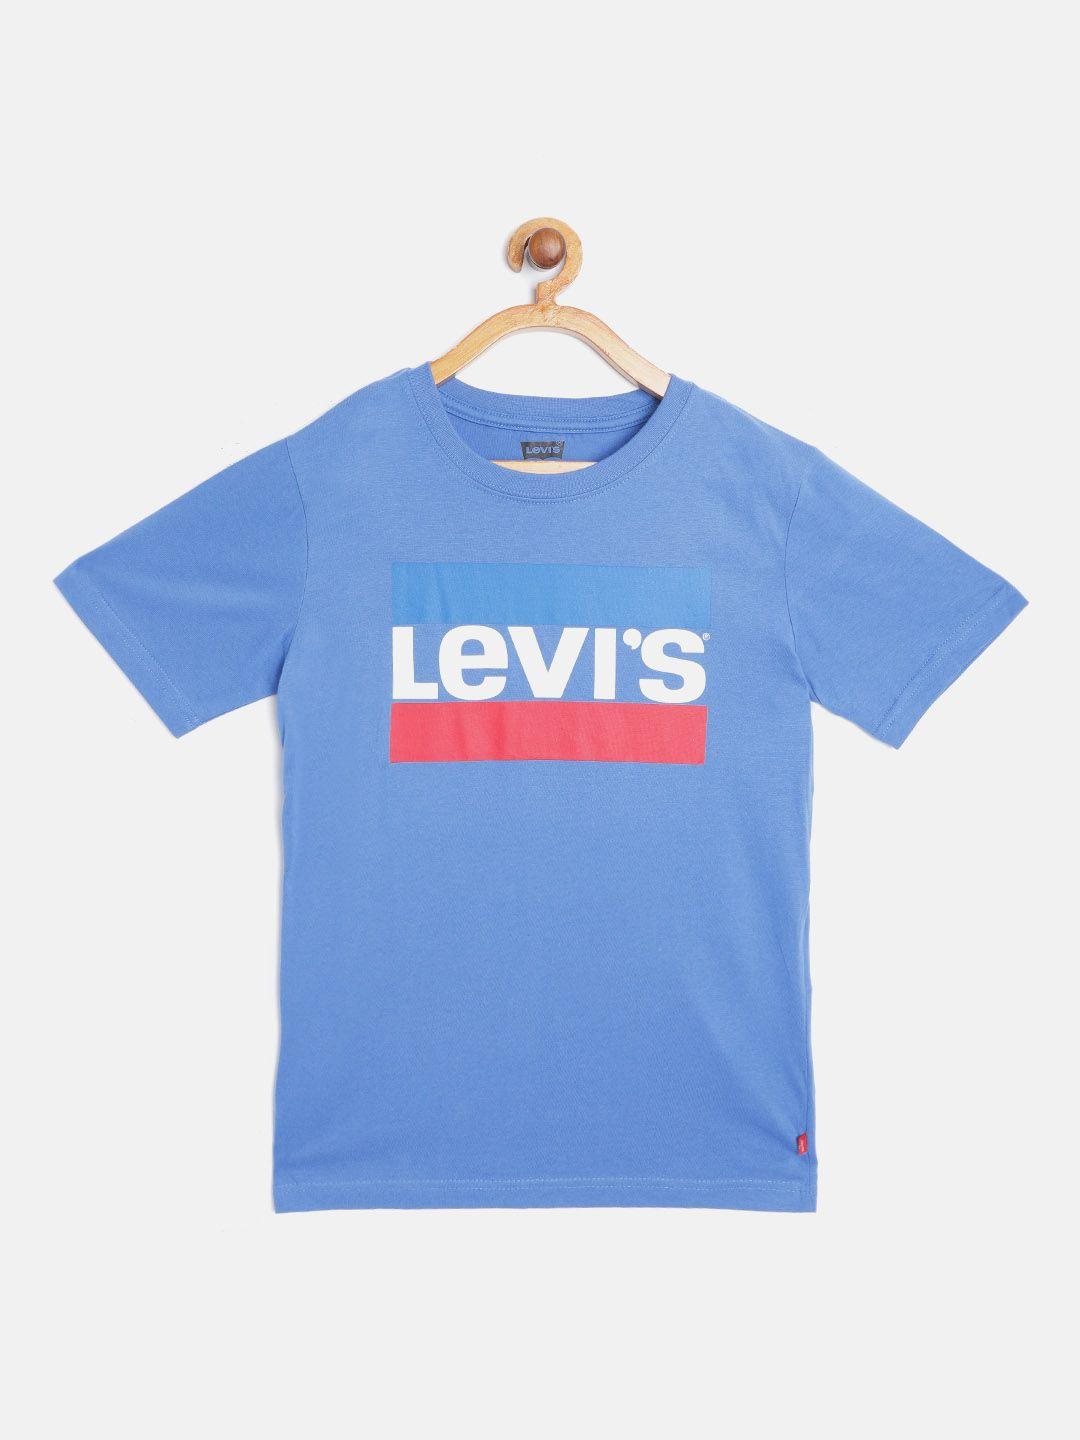 levis boys blue & red brand logo printed pure cotton t-shirt